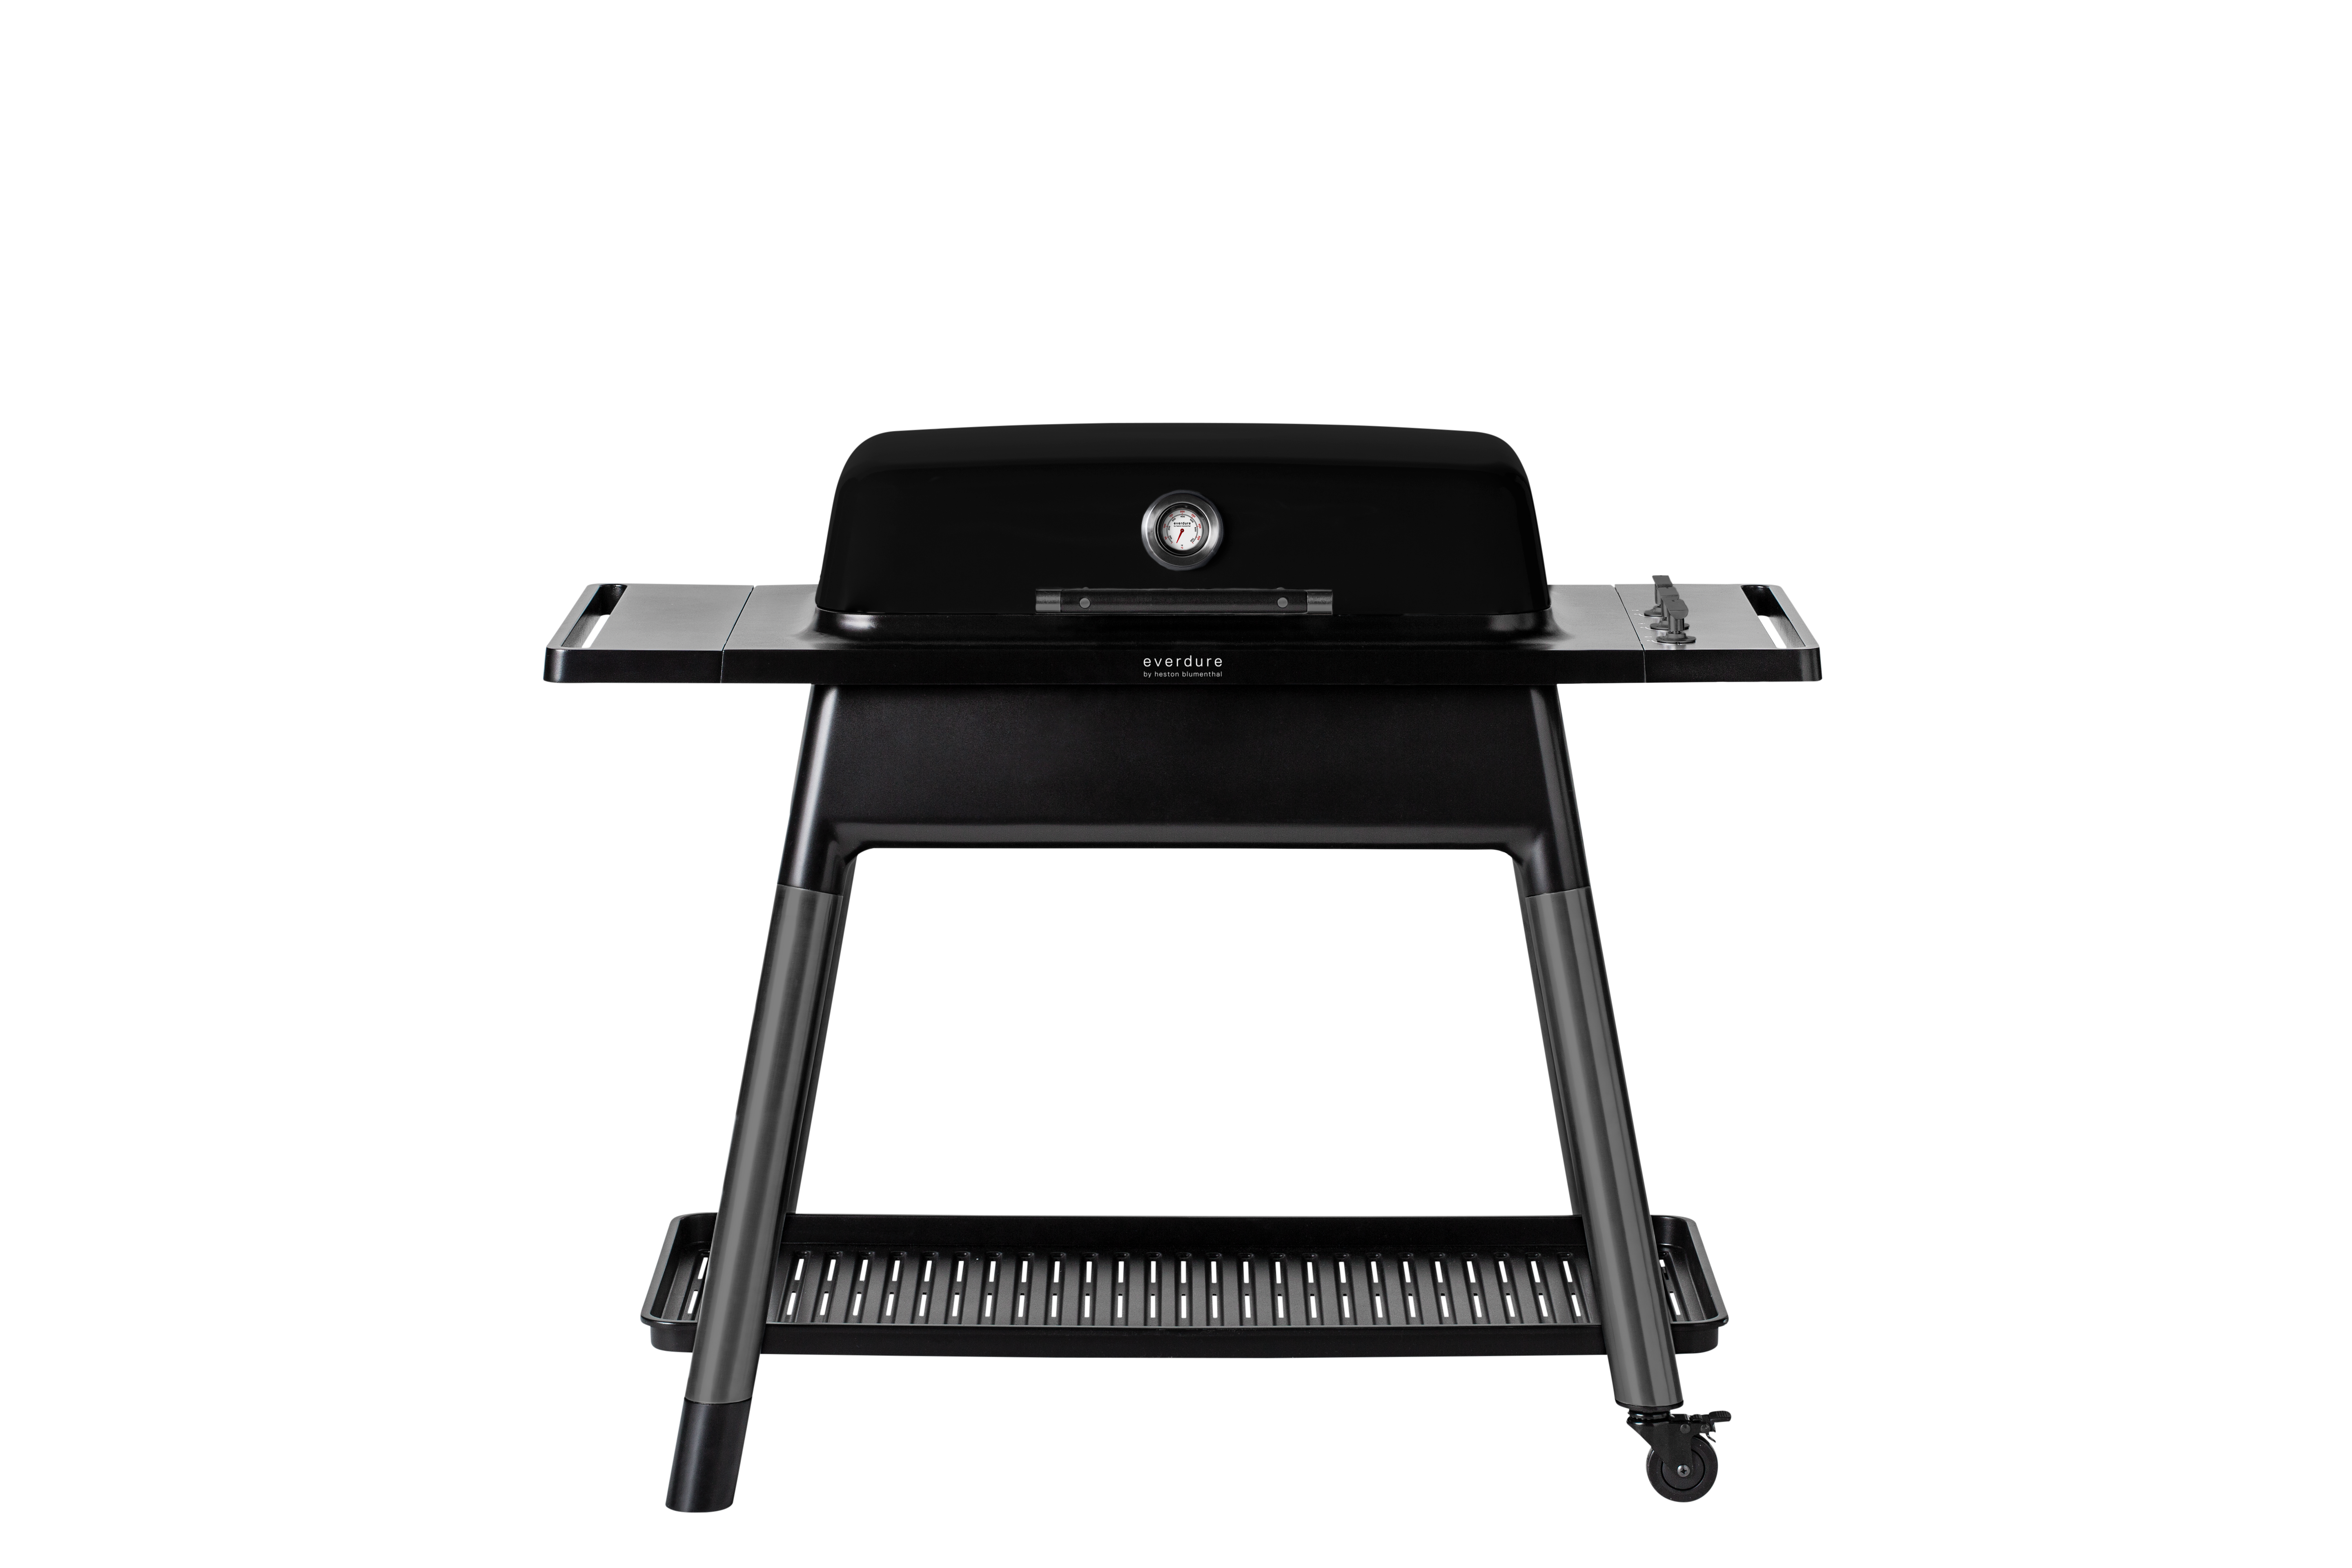 Furnace Gas Barbecue Model 2022